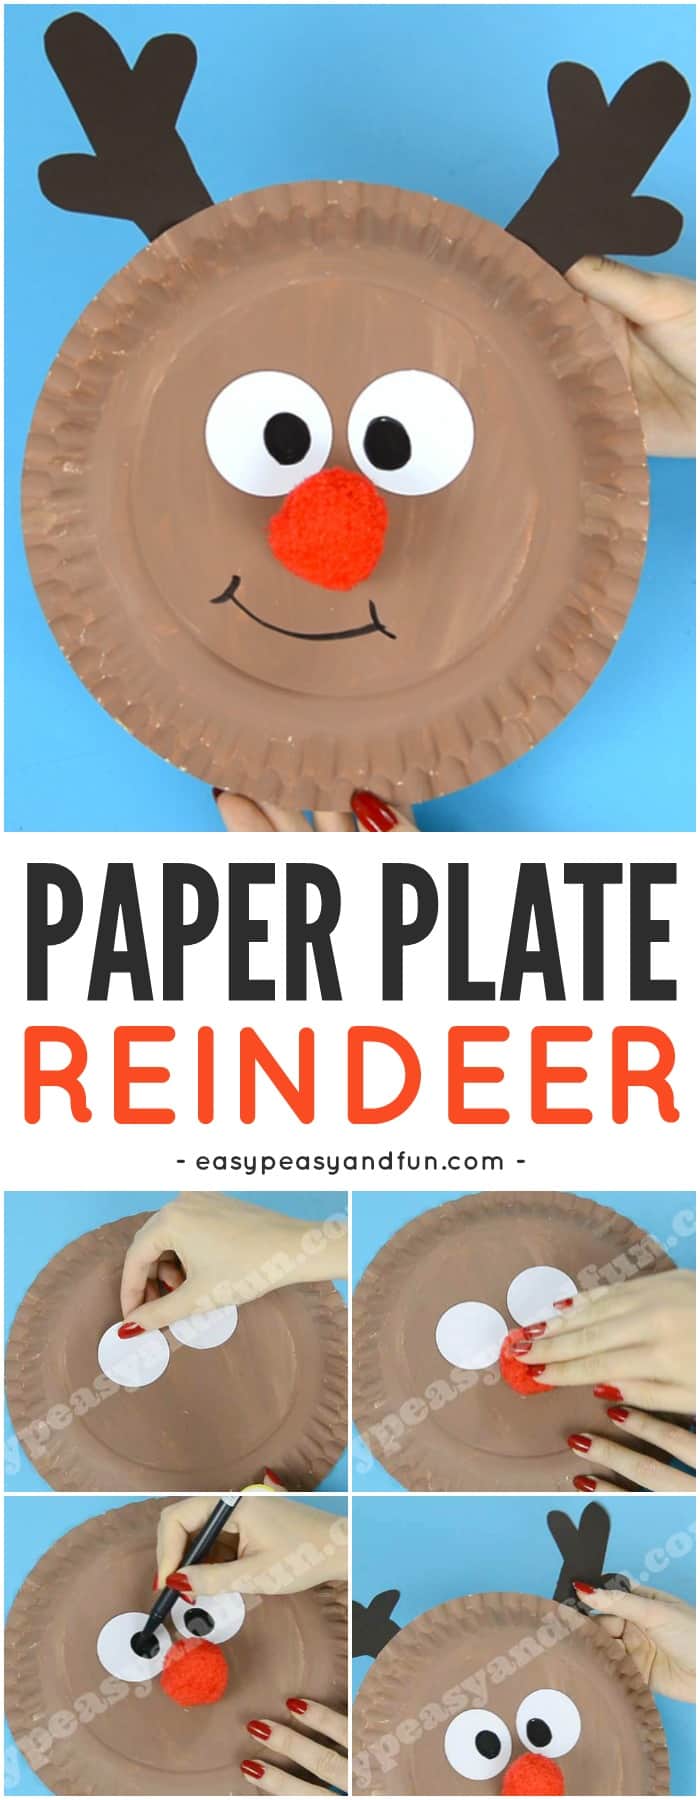 Cute reindeer paper plate craft for kids. A fun Christmas activity for kids.  #Craftforkids #Christmascraftsforkids #Reindeercraftsforkids